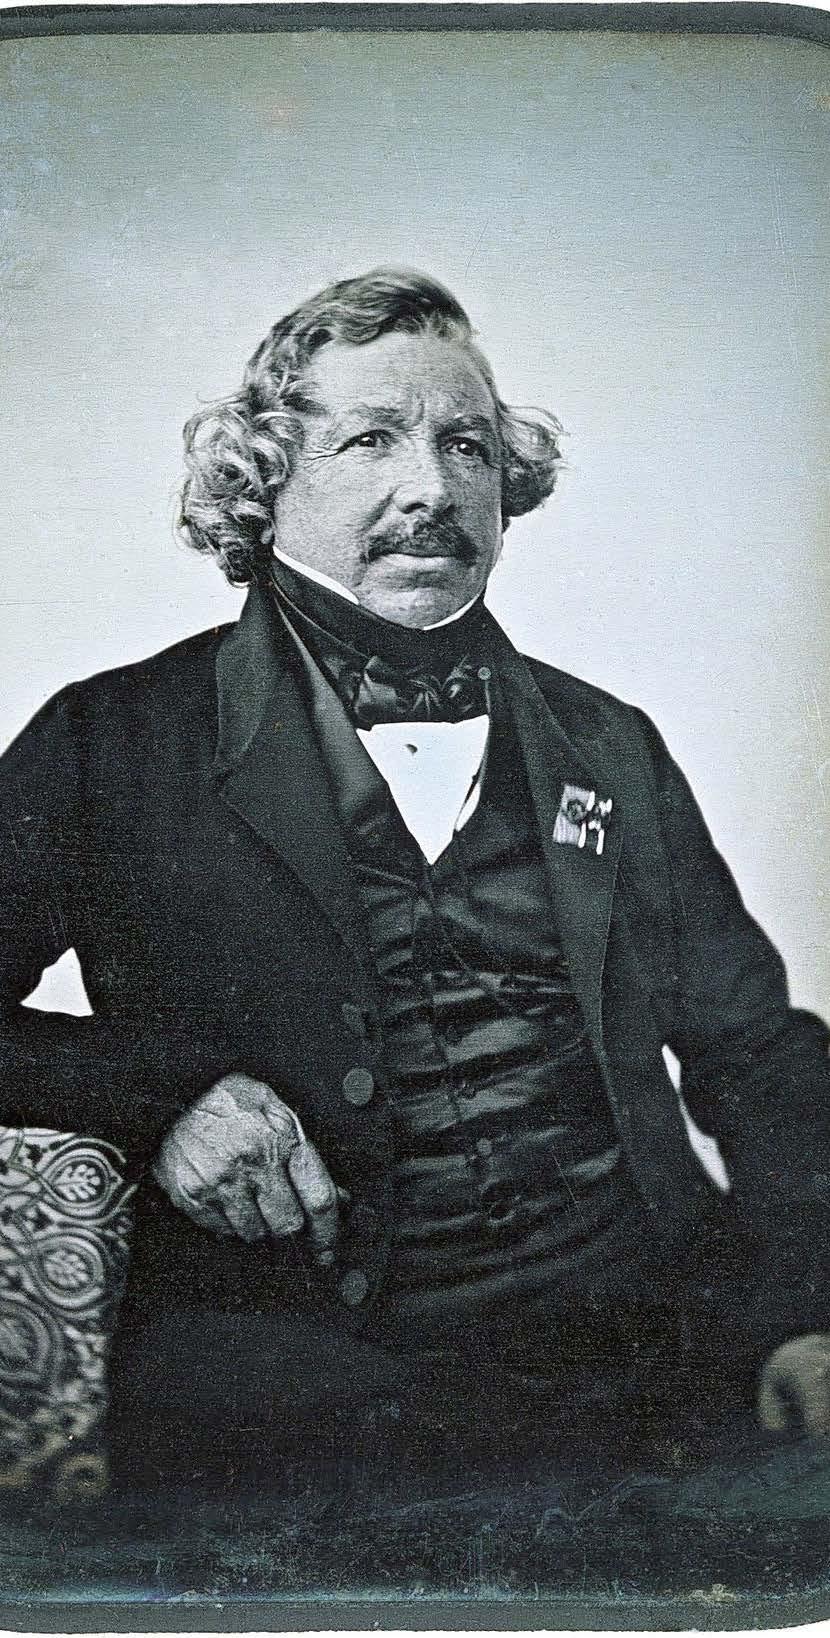 Daguerreotype 1839, Paris: Louis-Jacques-Mandé Daguerre introduced the first publicly available photographic process image on a polished sheet of silver-plated copper with a mirror finish, polished